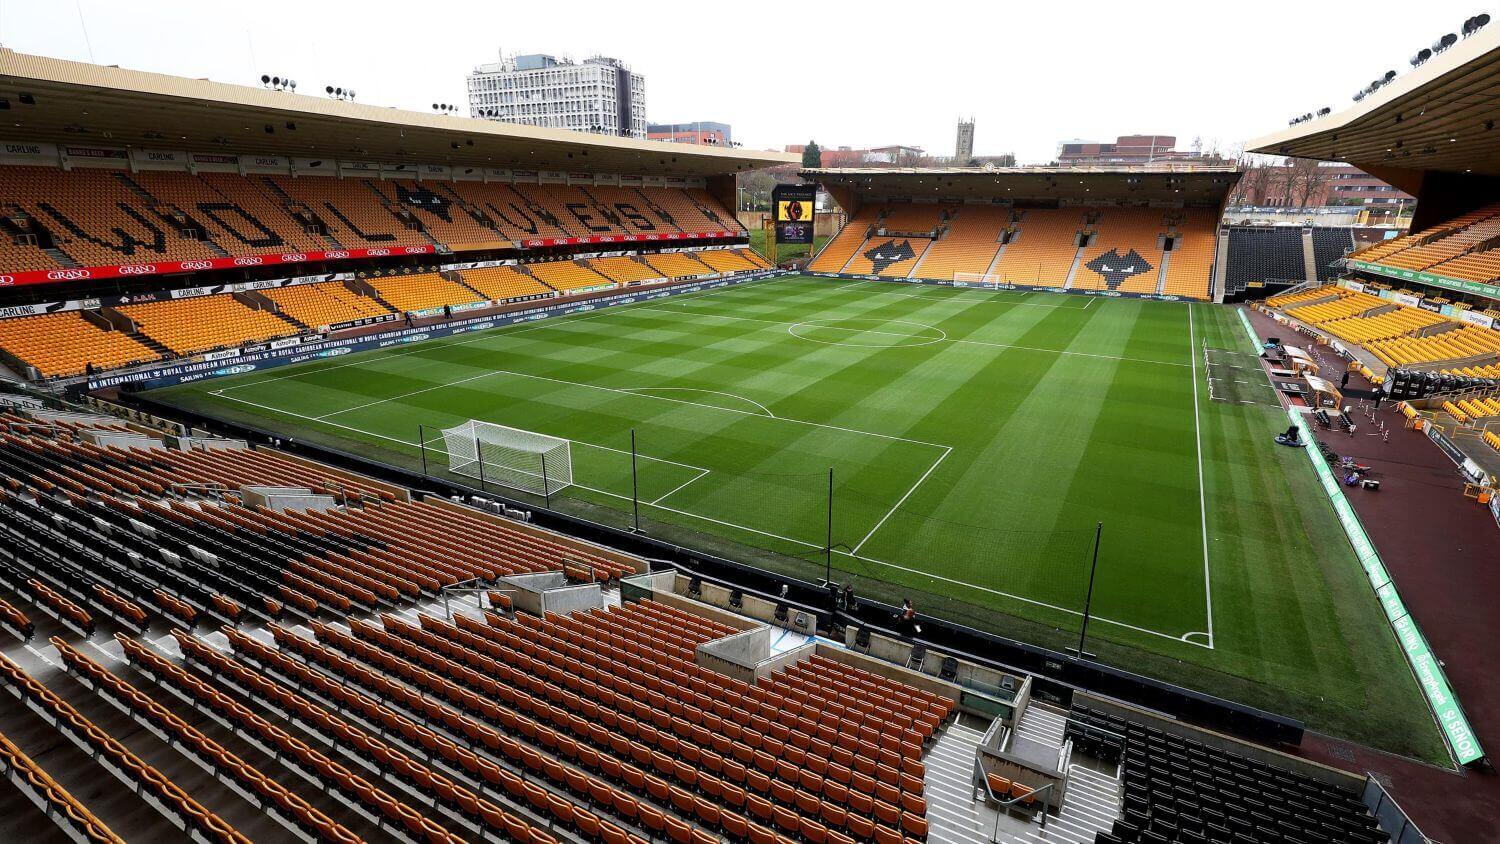 15-captivating-facts-about-molineux-stadium